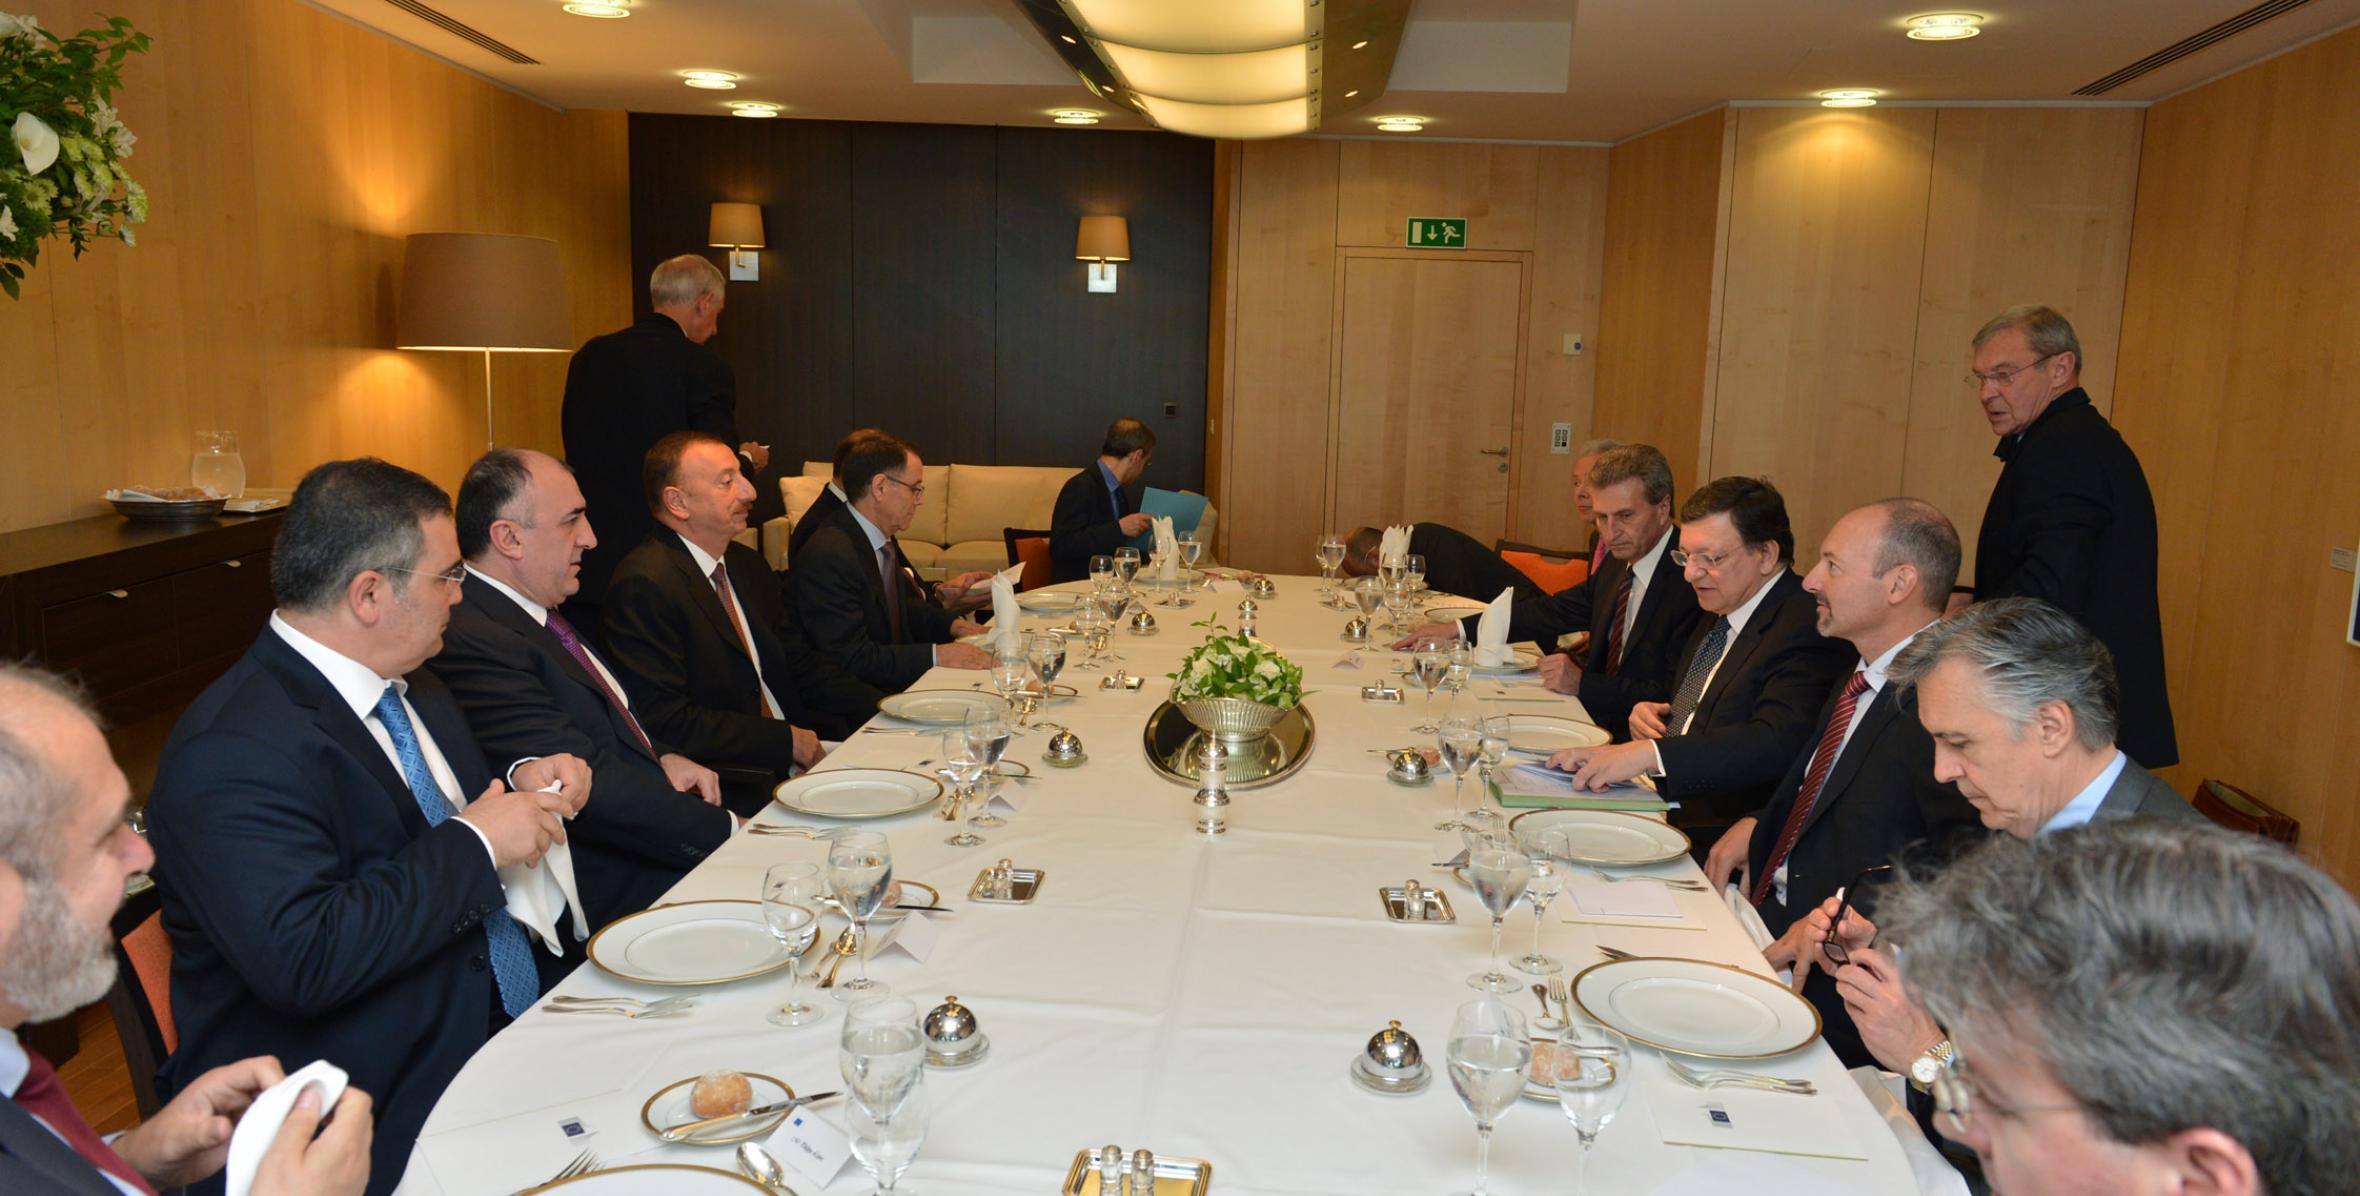 Ilham Aliyev had lunch with European Commission President Jose Manuel Barroso